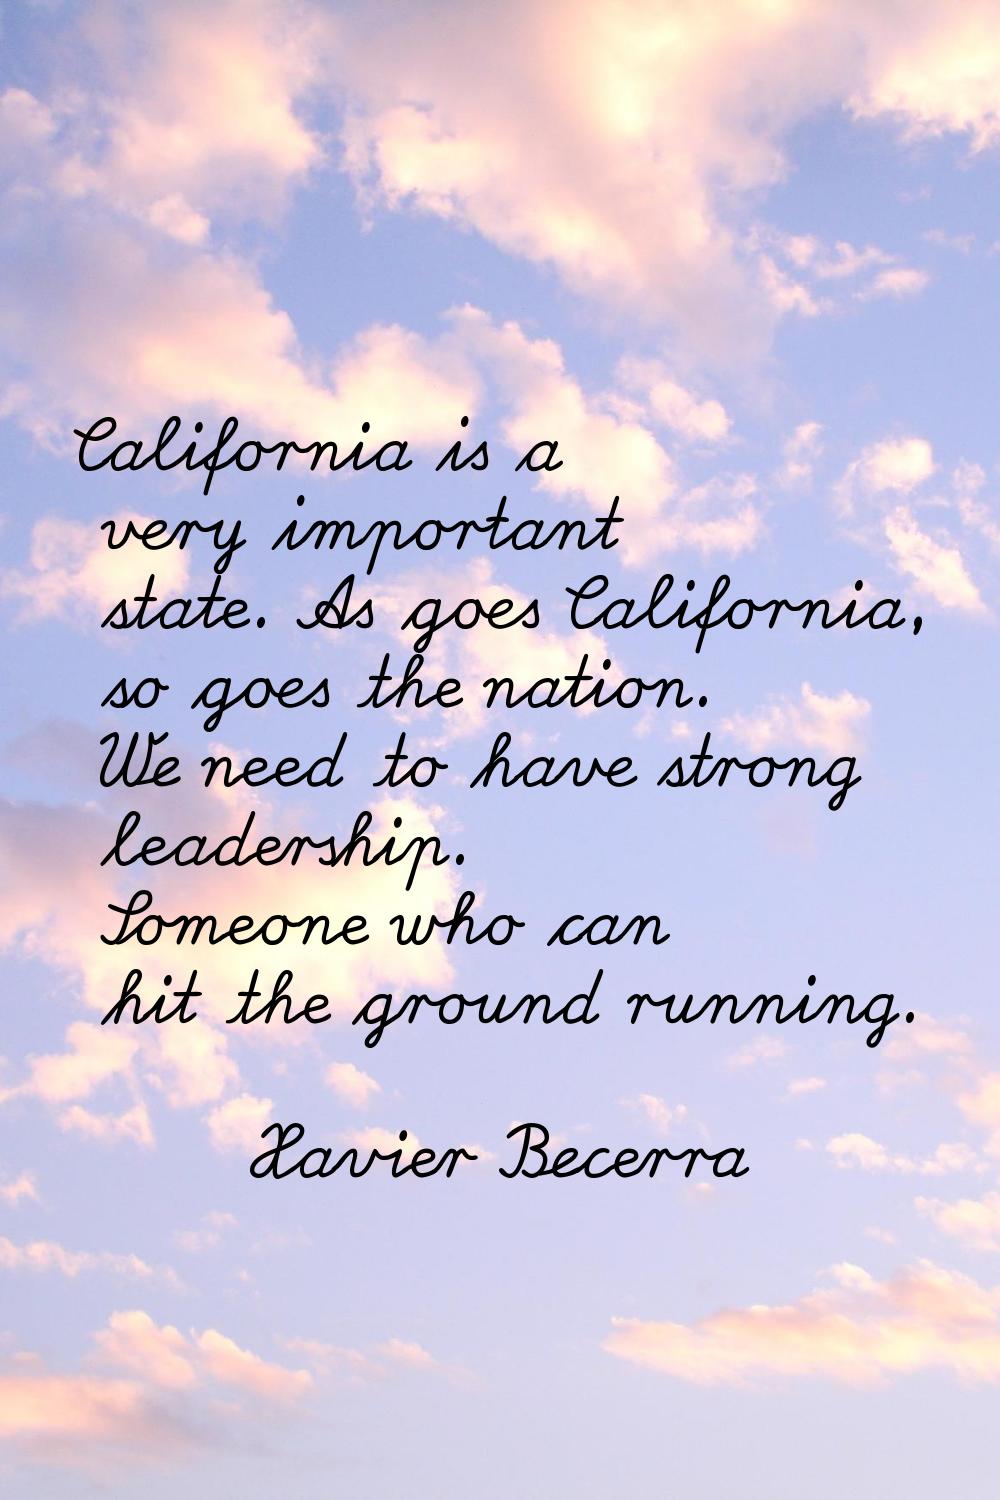 California is a very important state. As goes California, so goes the nation. We need to have stron